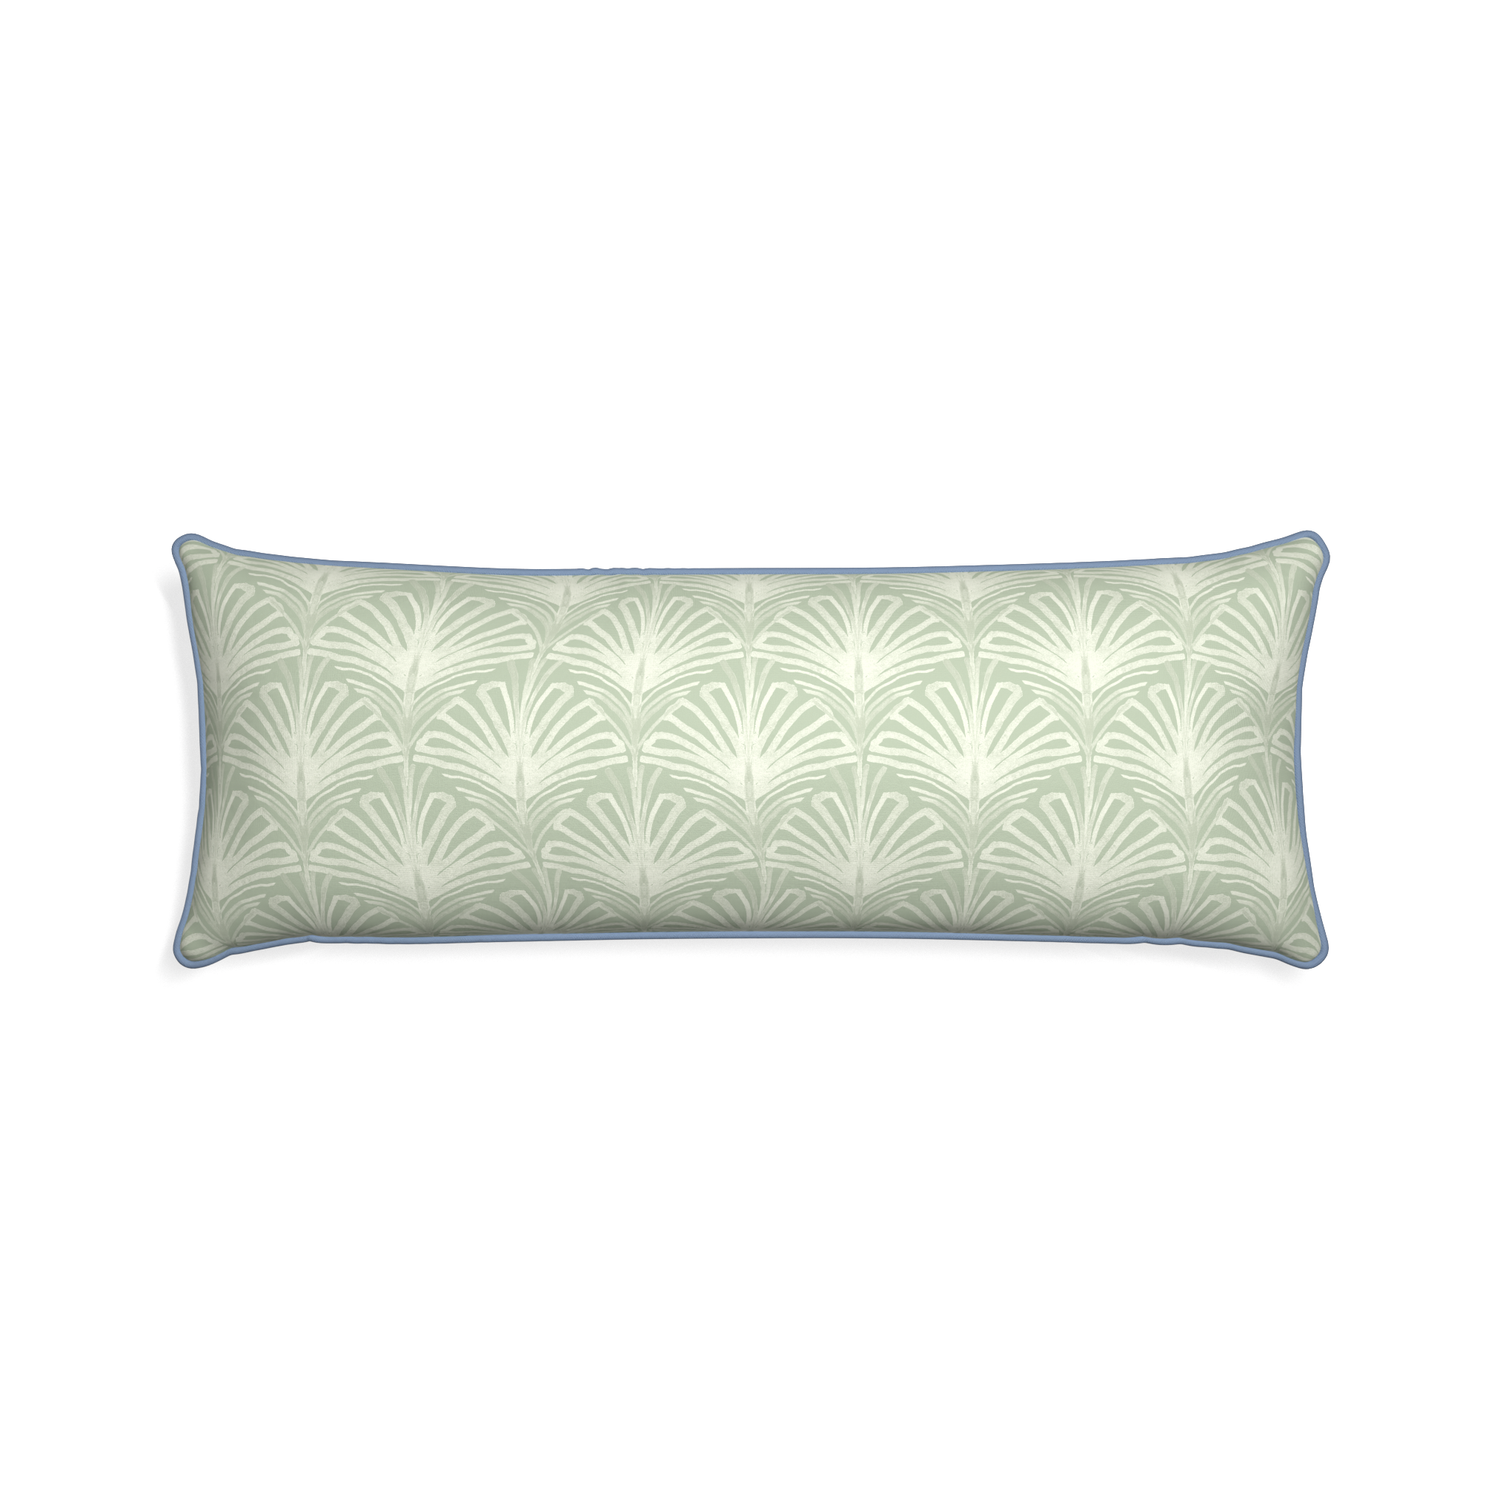 Xl-lumbar suzy sage custom sage green palmpillow with sky piping on white background